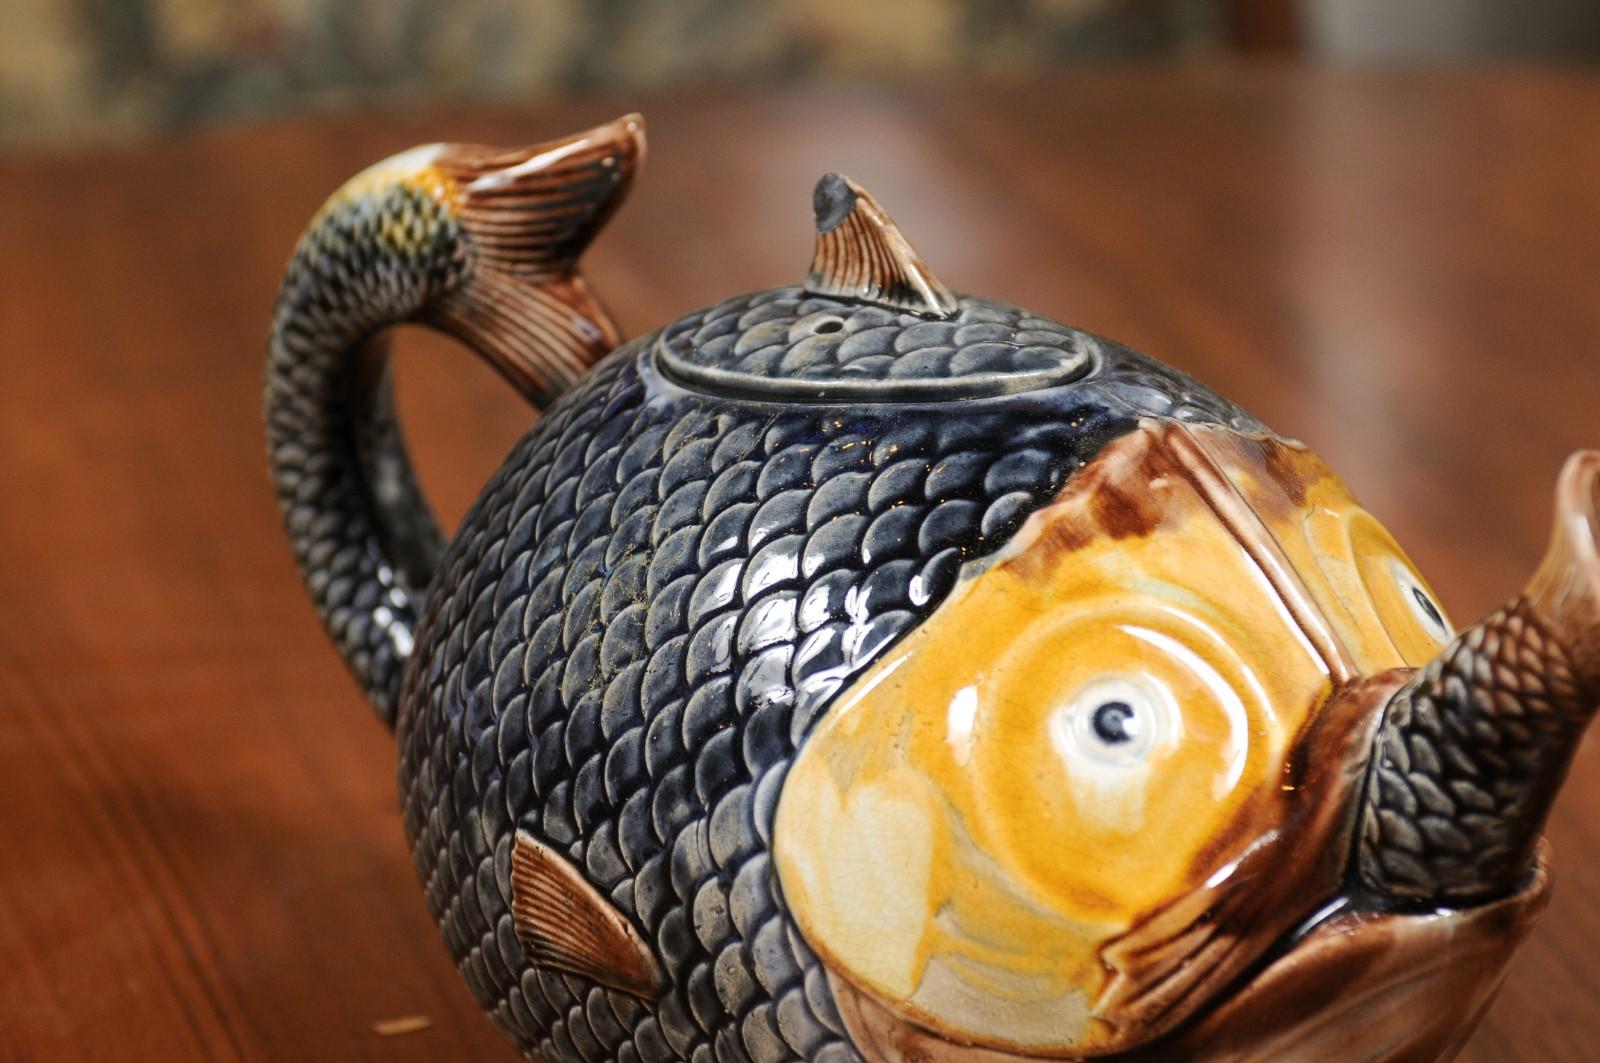 French 1885s Glazed Majolica Teapot Depicting a Fish Eating Another Fish 1